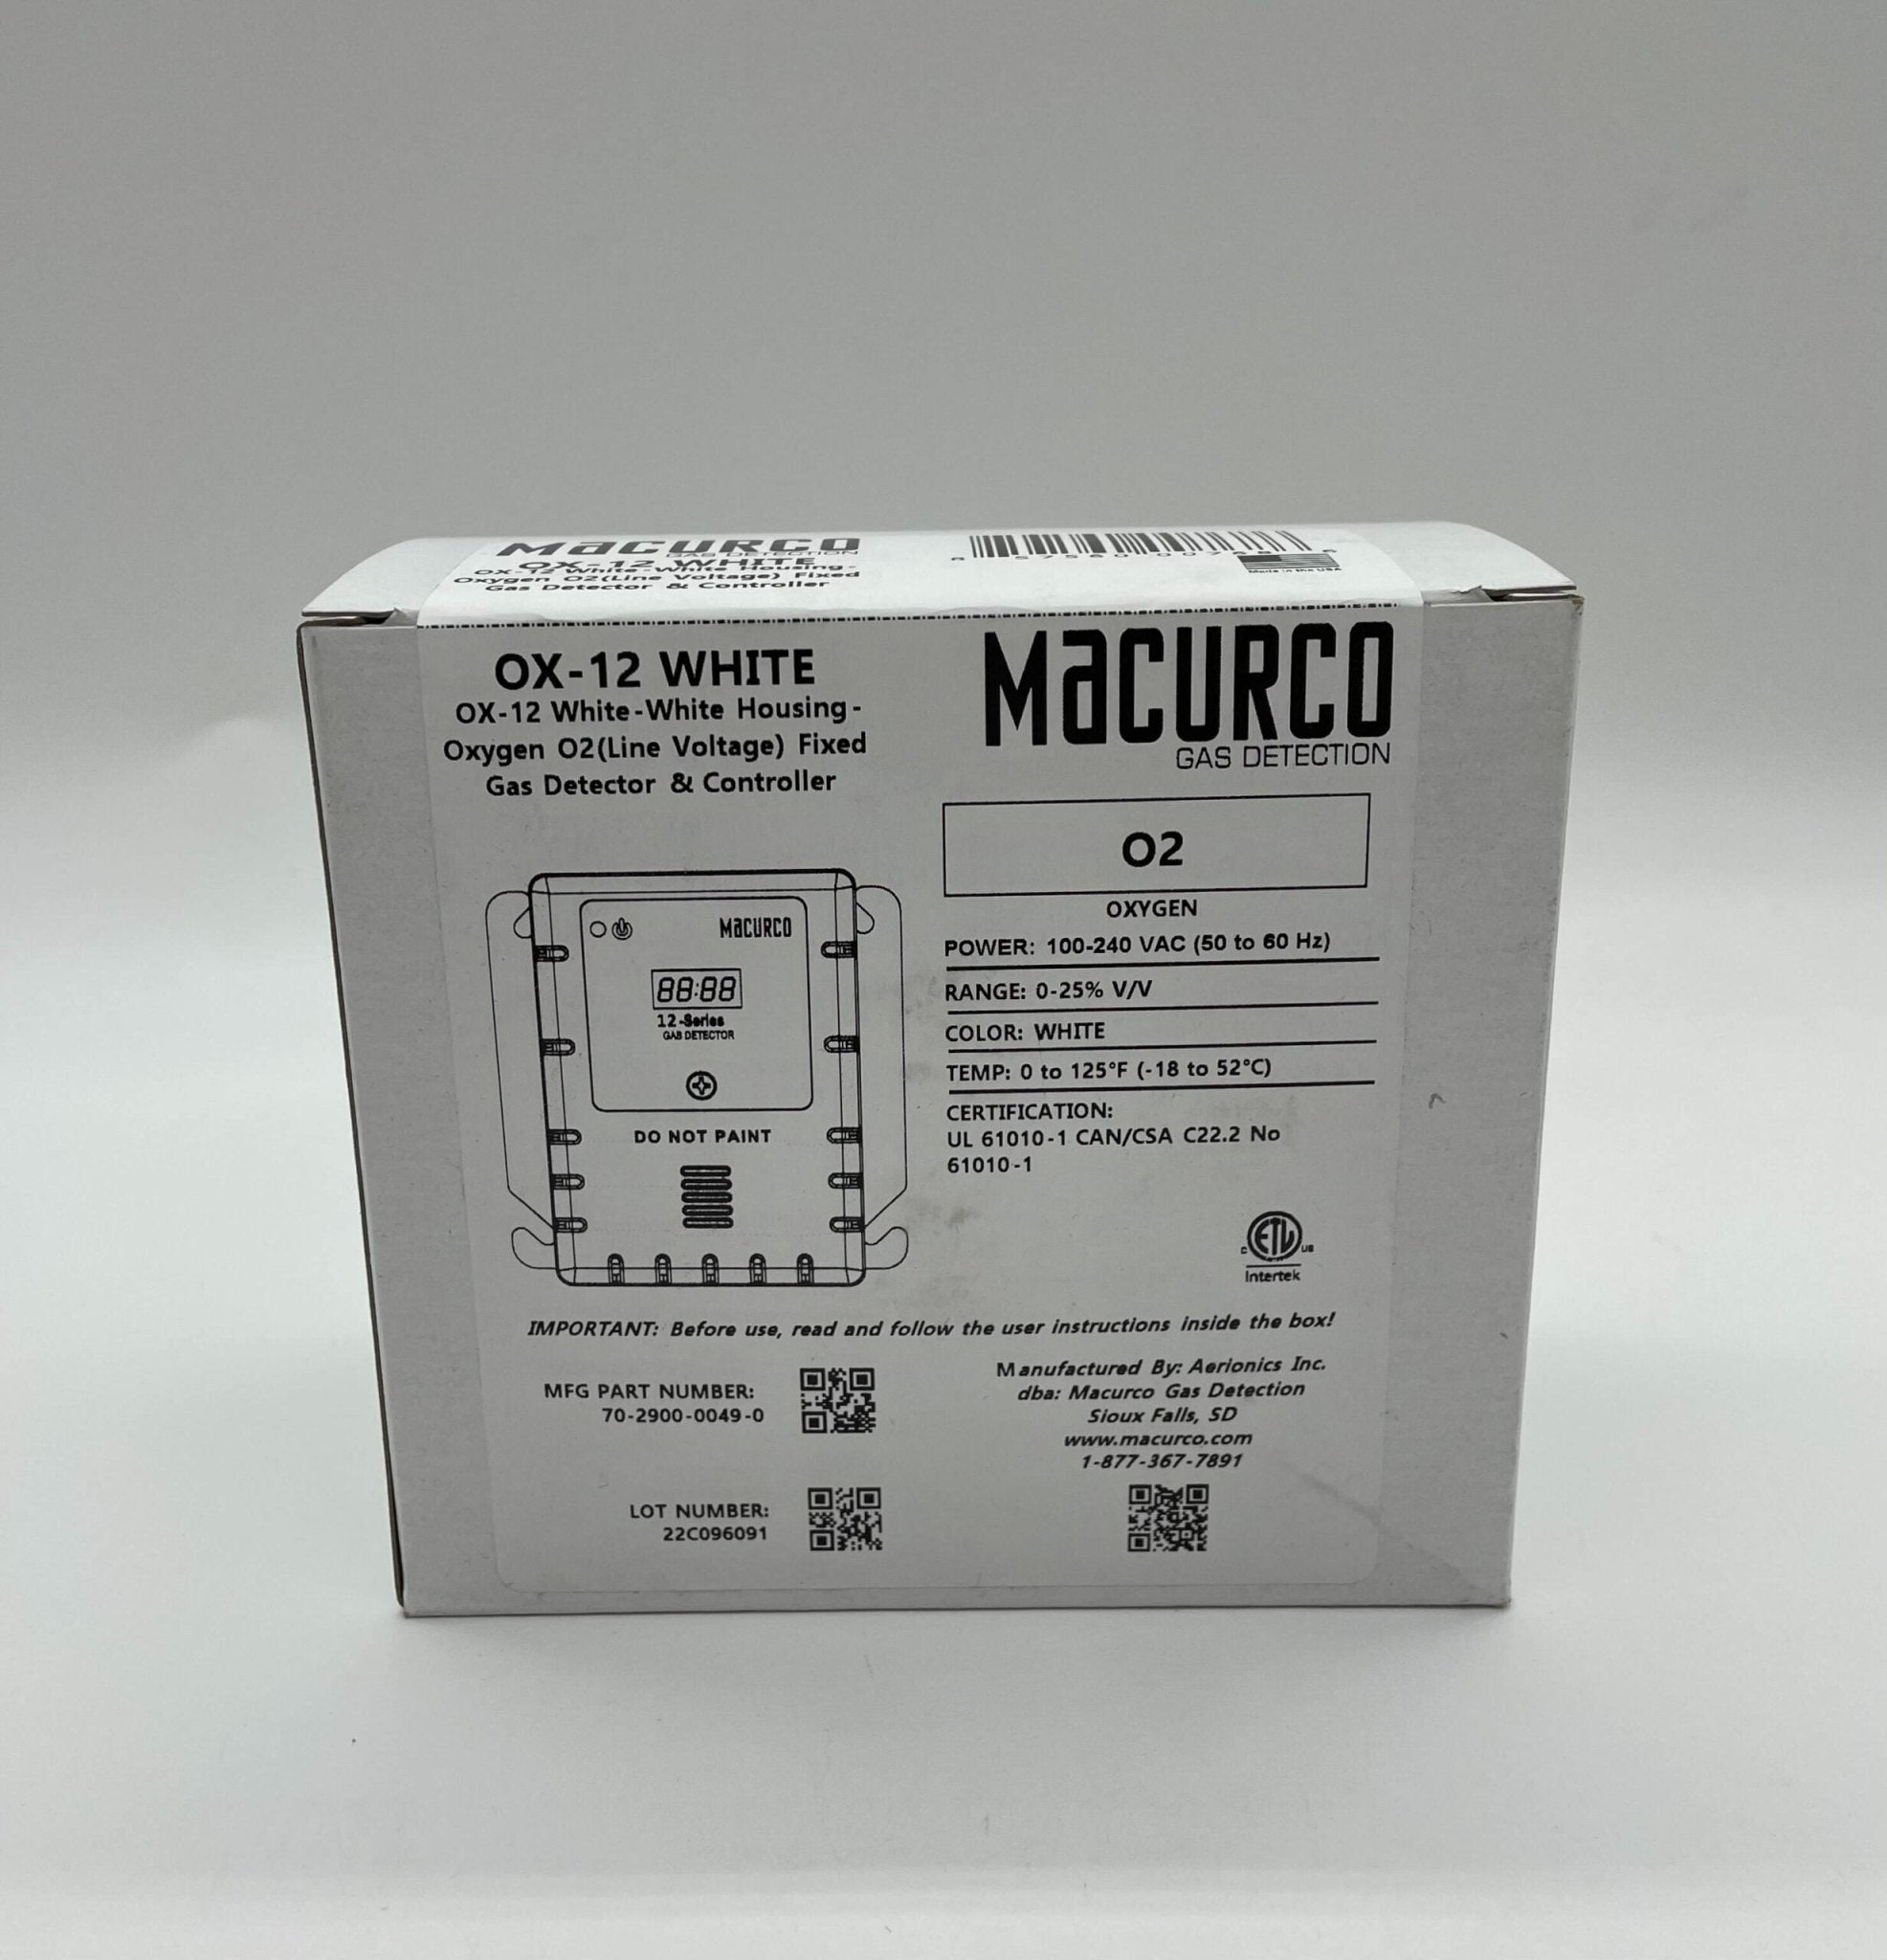 Macurco OX-12 WHITE - The Fire Alarm Supplier